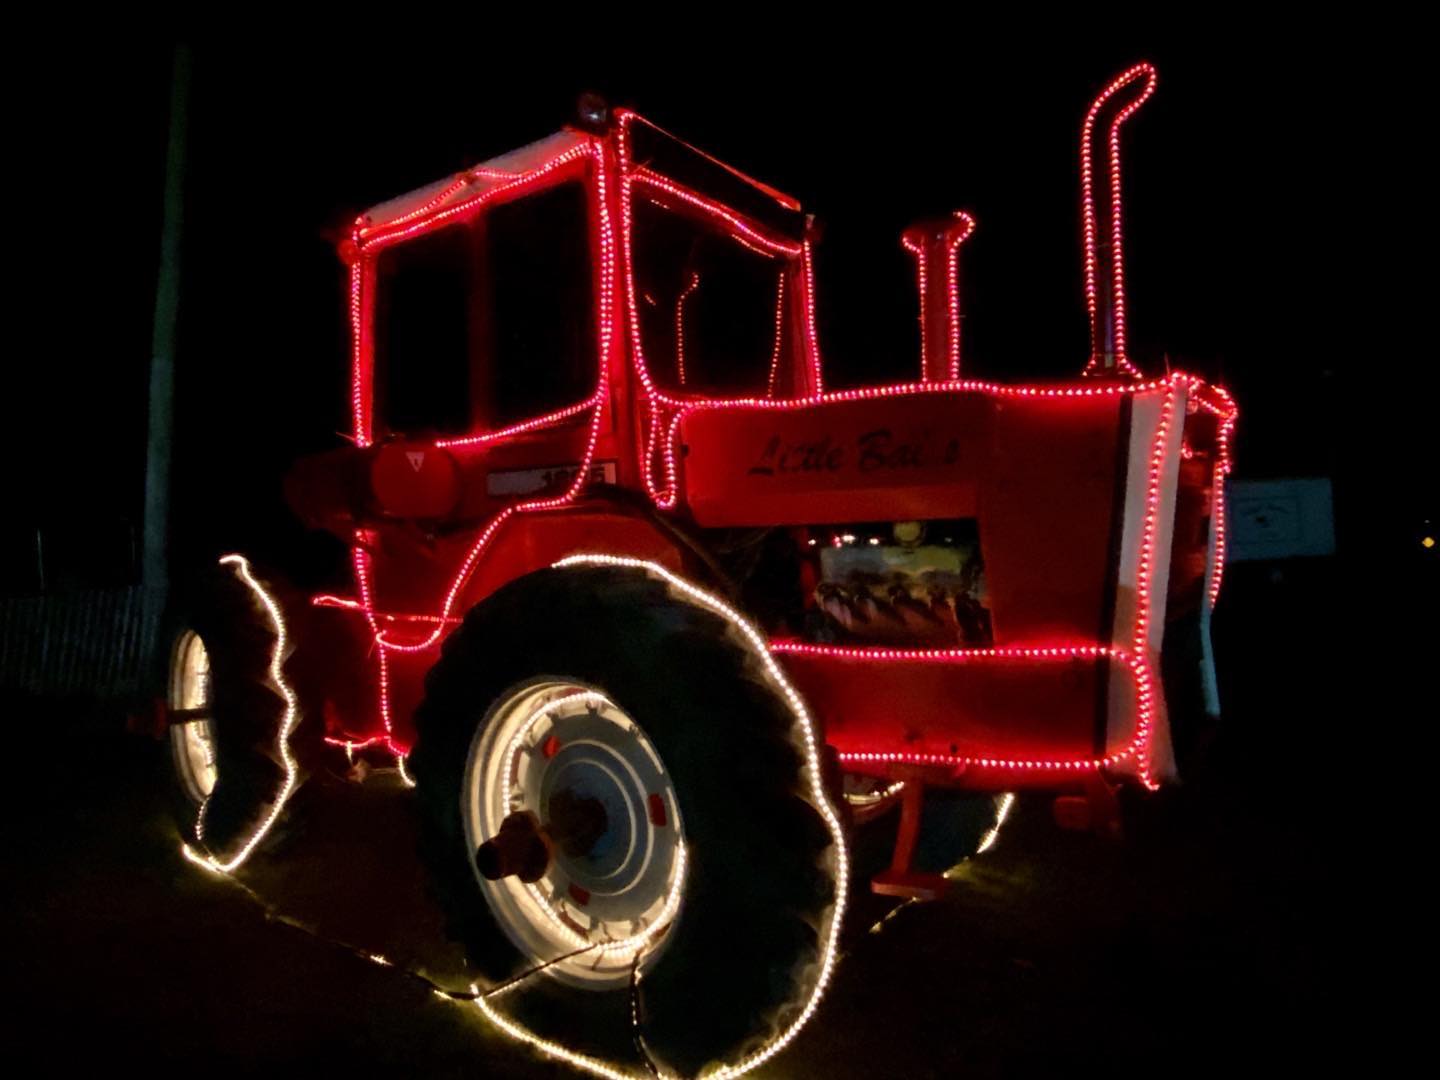 Massey Ferguson tractor outlined with Christmas Lights in New Paris, OH at Today’s Harvest Farm Stand, our berth for the night as we drive west. Photo by Cindy Orcutt. #masseyfurgeson #newparisohio #orcuttphotography #ohioruralphotography